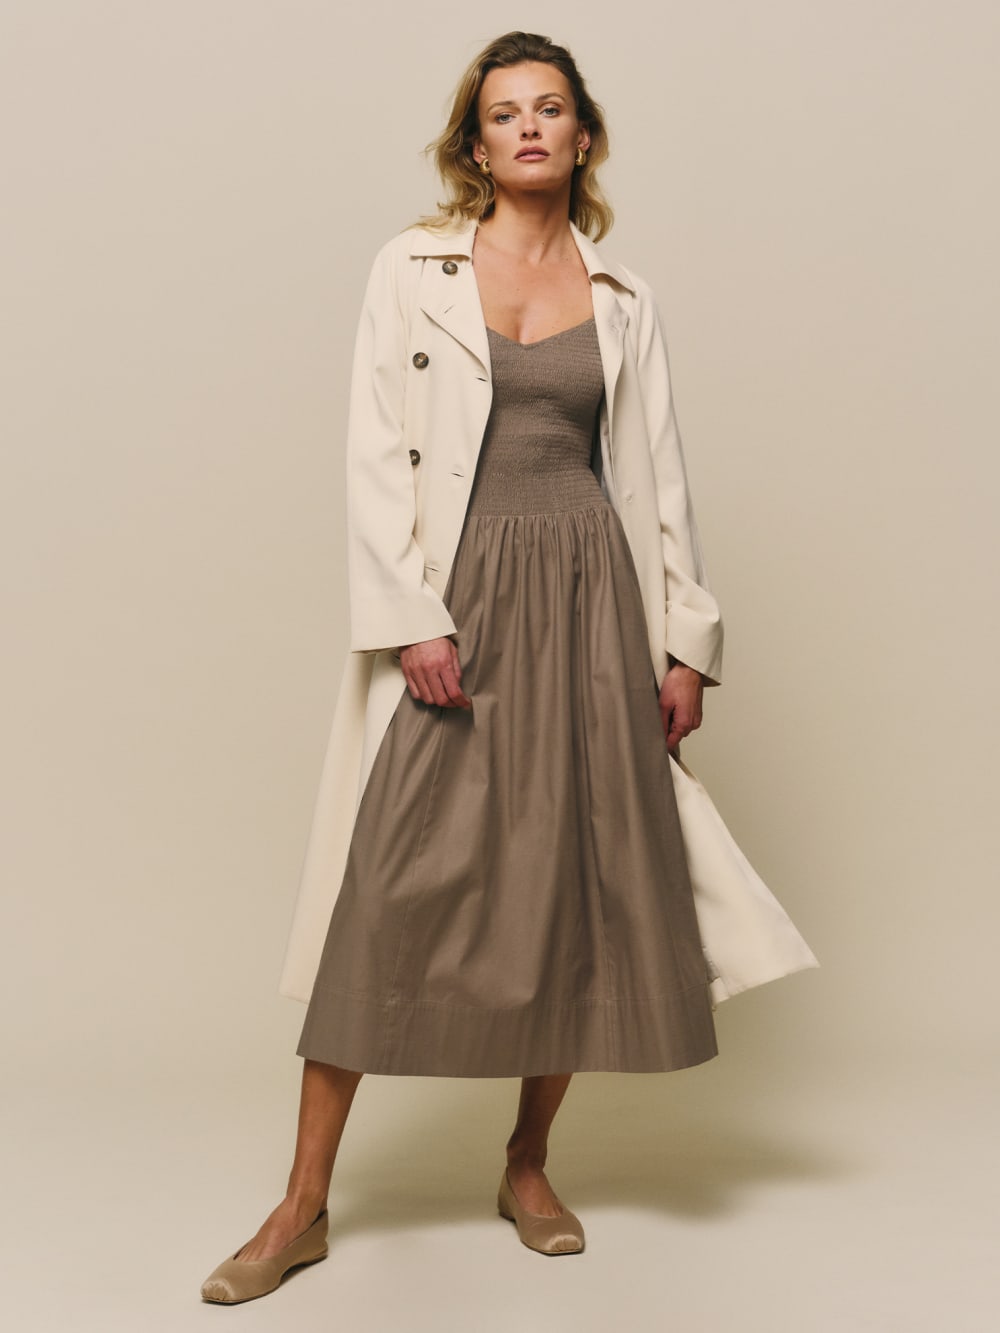 Reformation double-breasted Kensington Trench in beige.  
